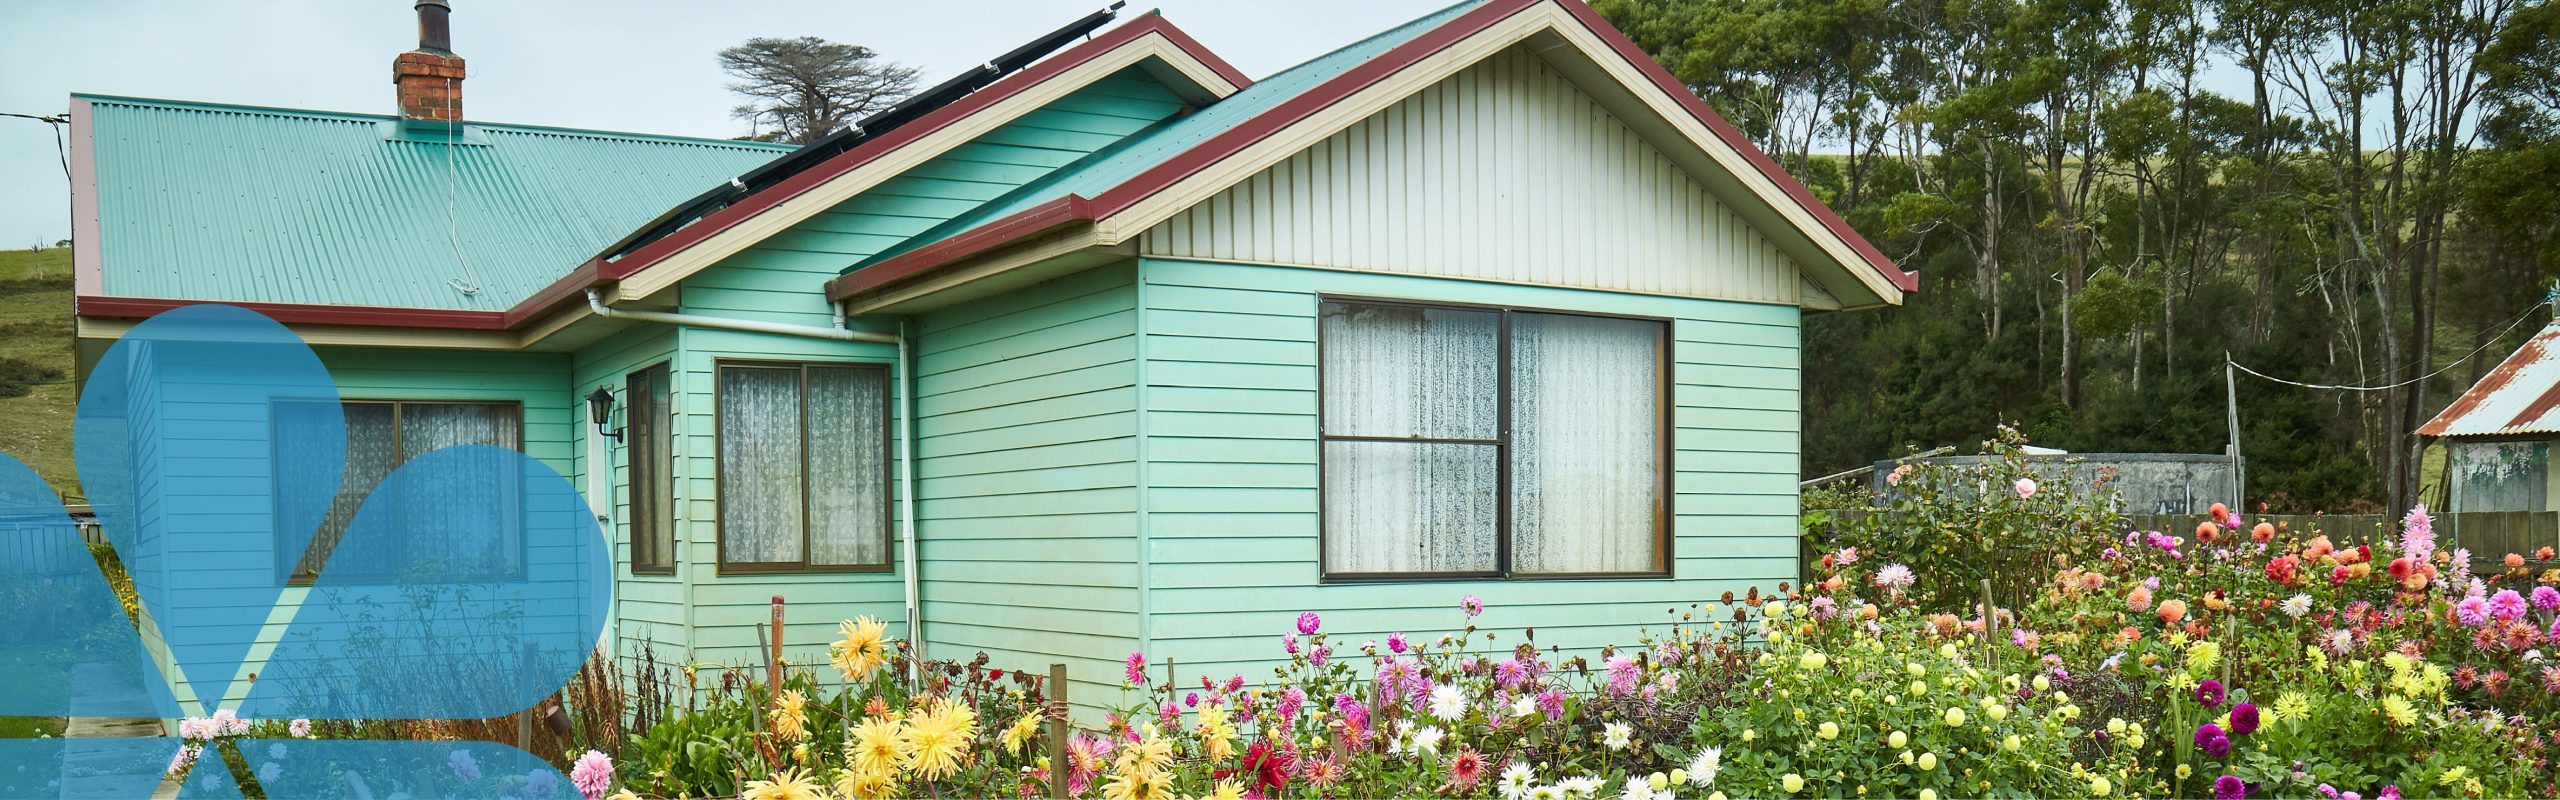 Green weatherboard house with a beautiful flower garden across the front lawn.